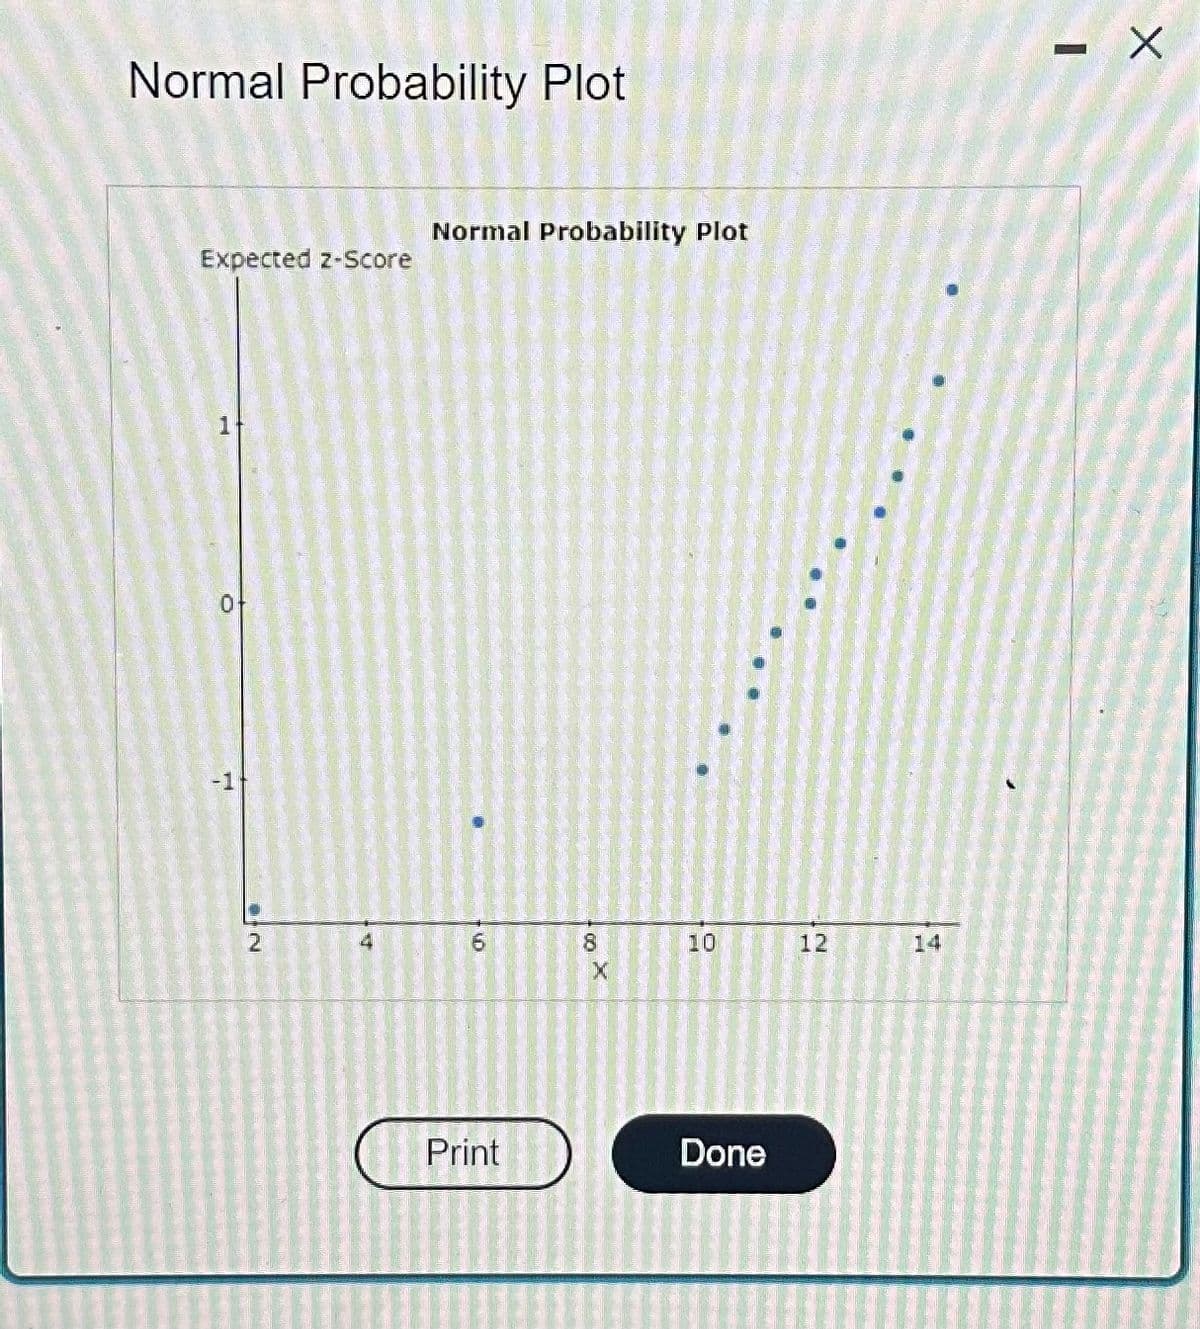 Normal Probability Plot
12
Expected z-Score
1
0
-1
2
Normal Probability Plot
- 10
6
Print
100 x
8
X
10
Done
51
12
14
X